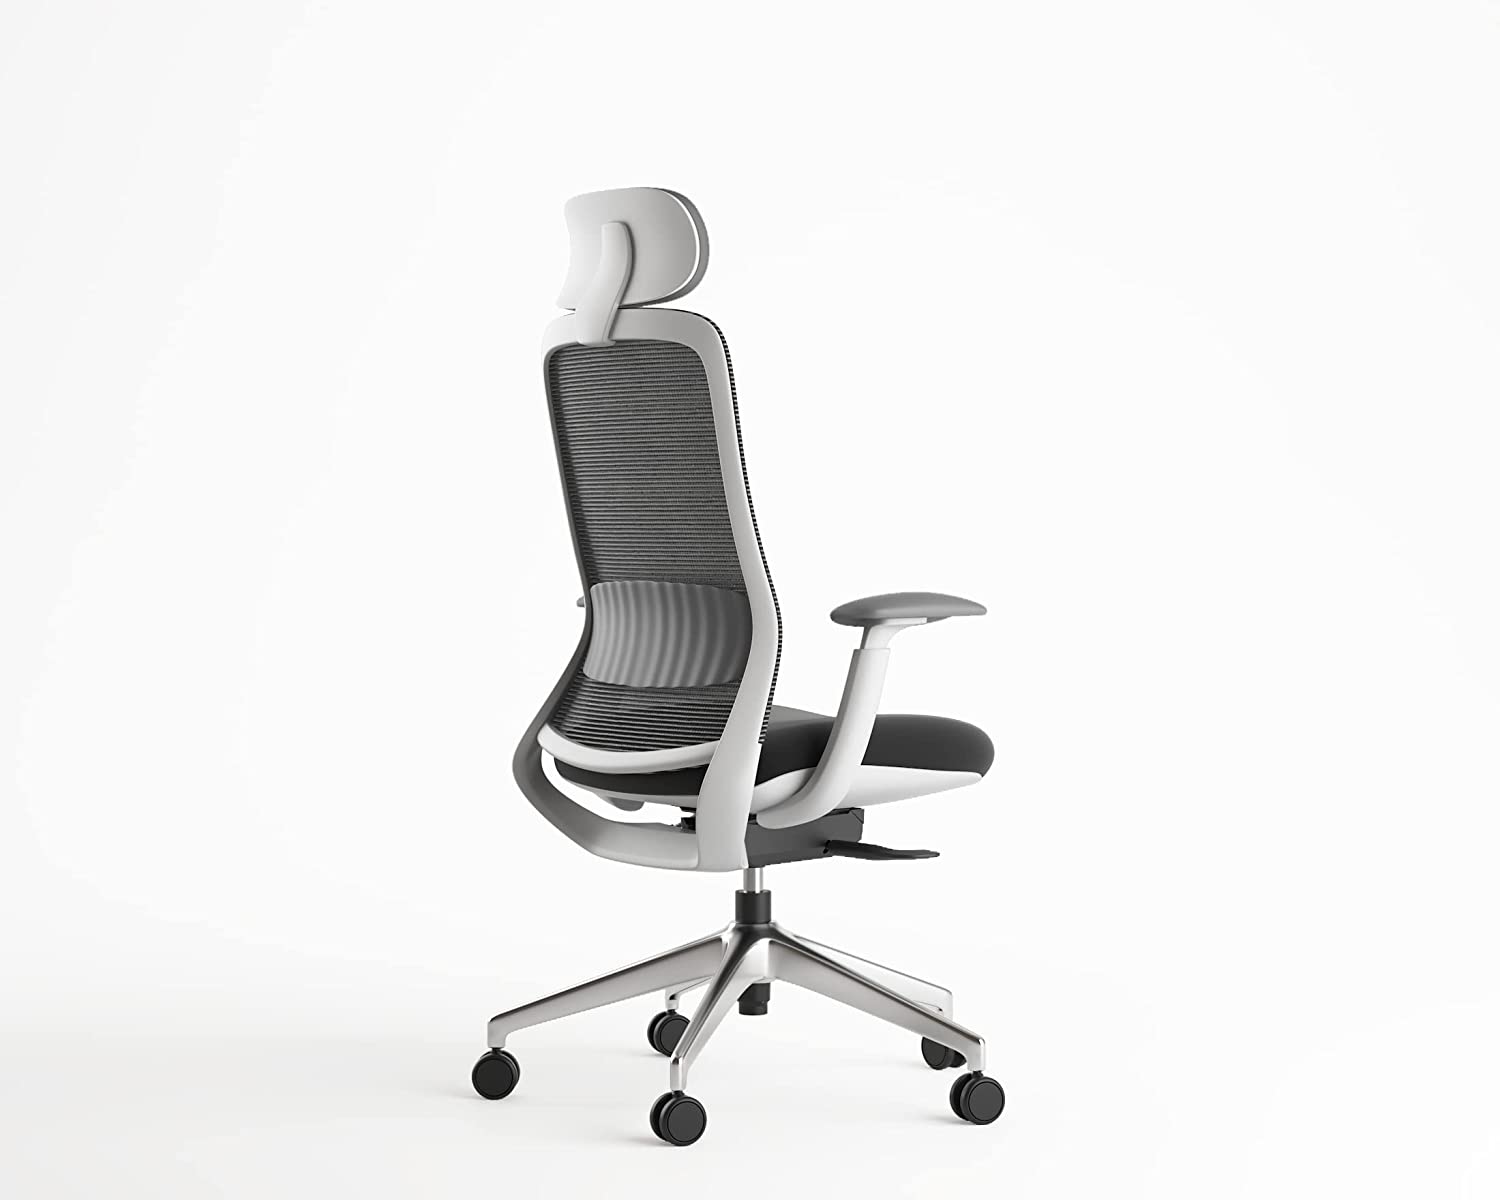 NIO Chair, Ergonomic Design, Premium Office & Computer Chair with adjustable features by Navodesk Black & White